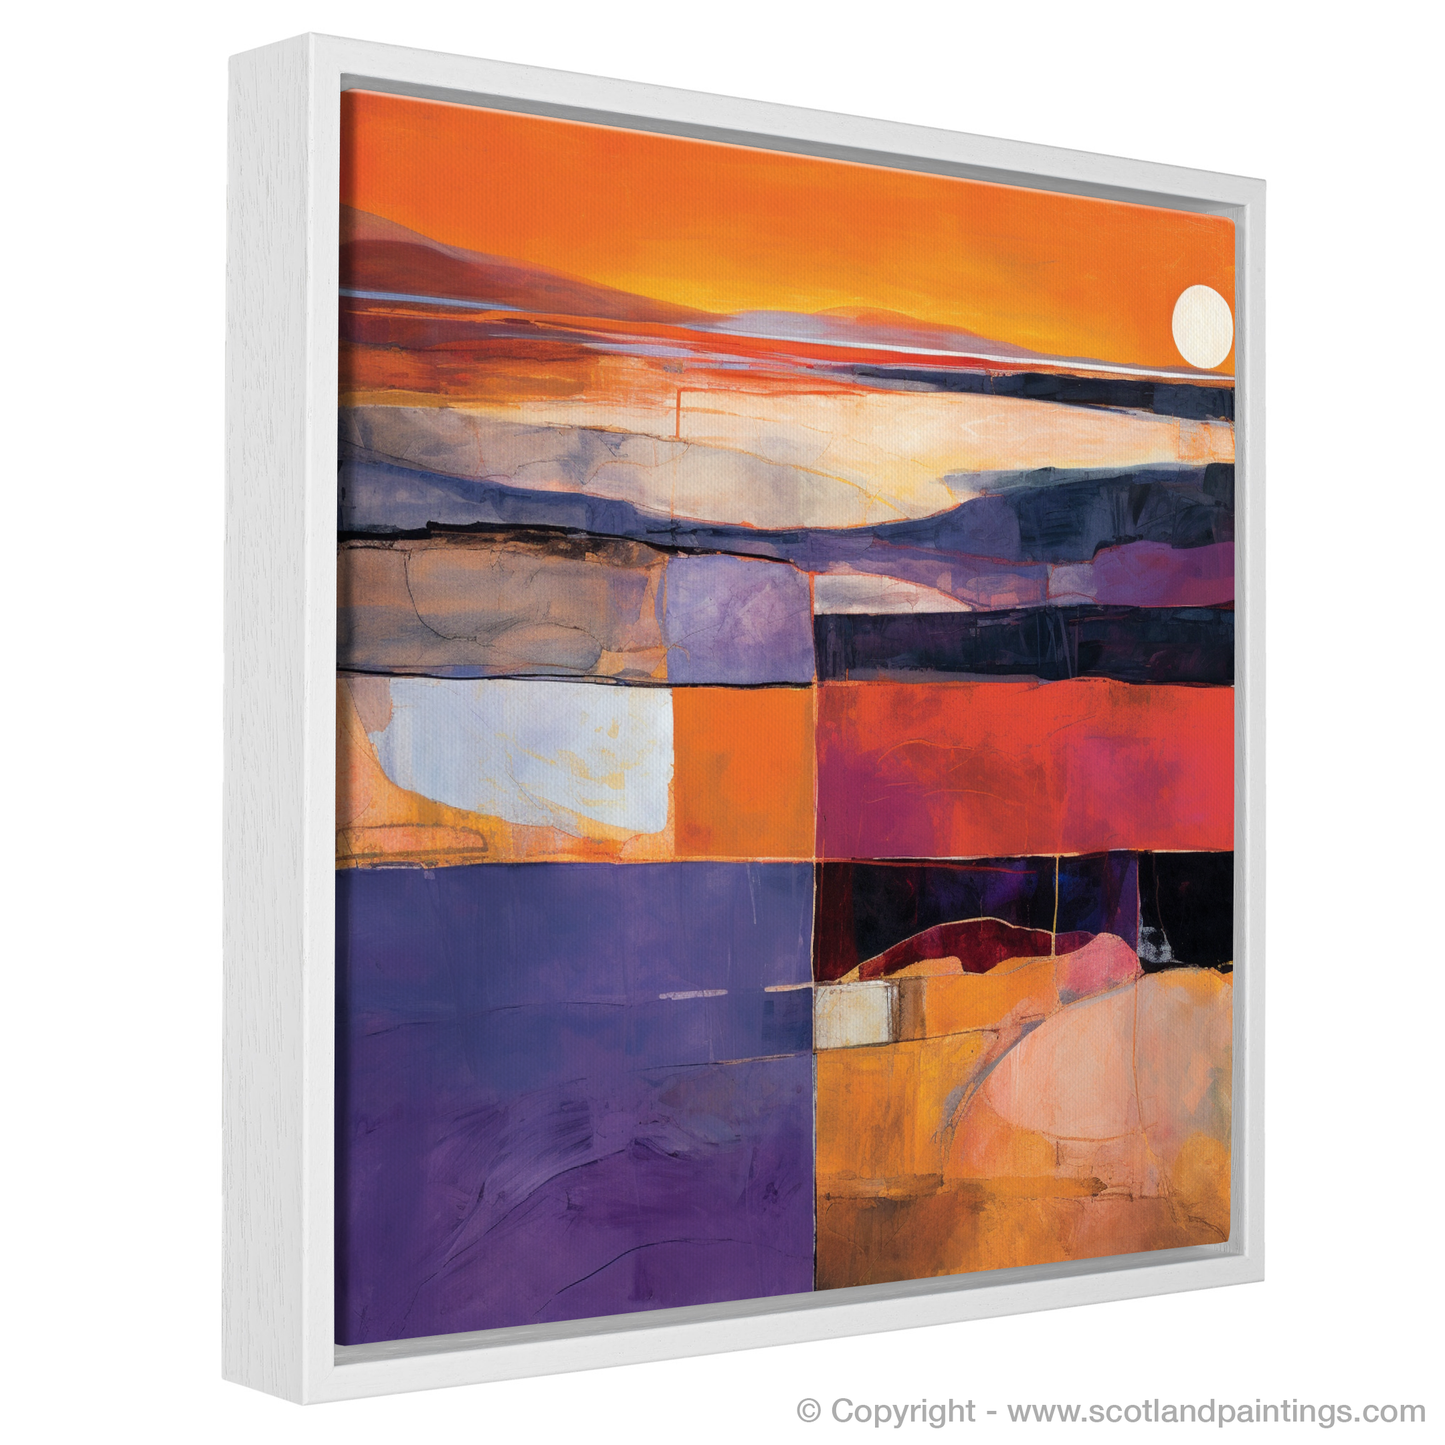 Abstract Impressionism of Seilebost Beach Sunset